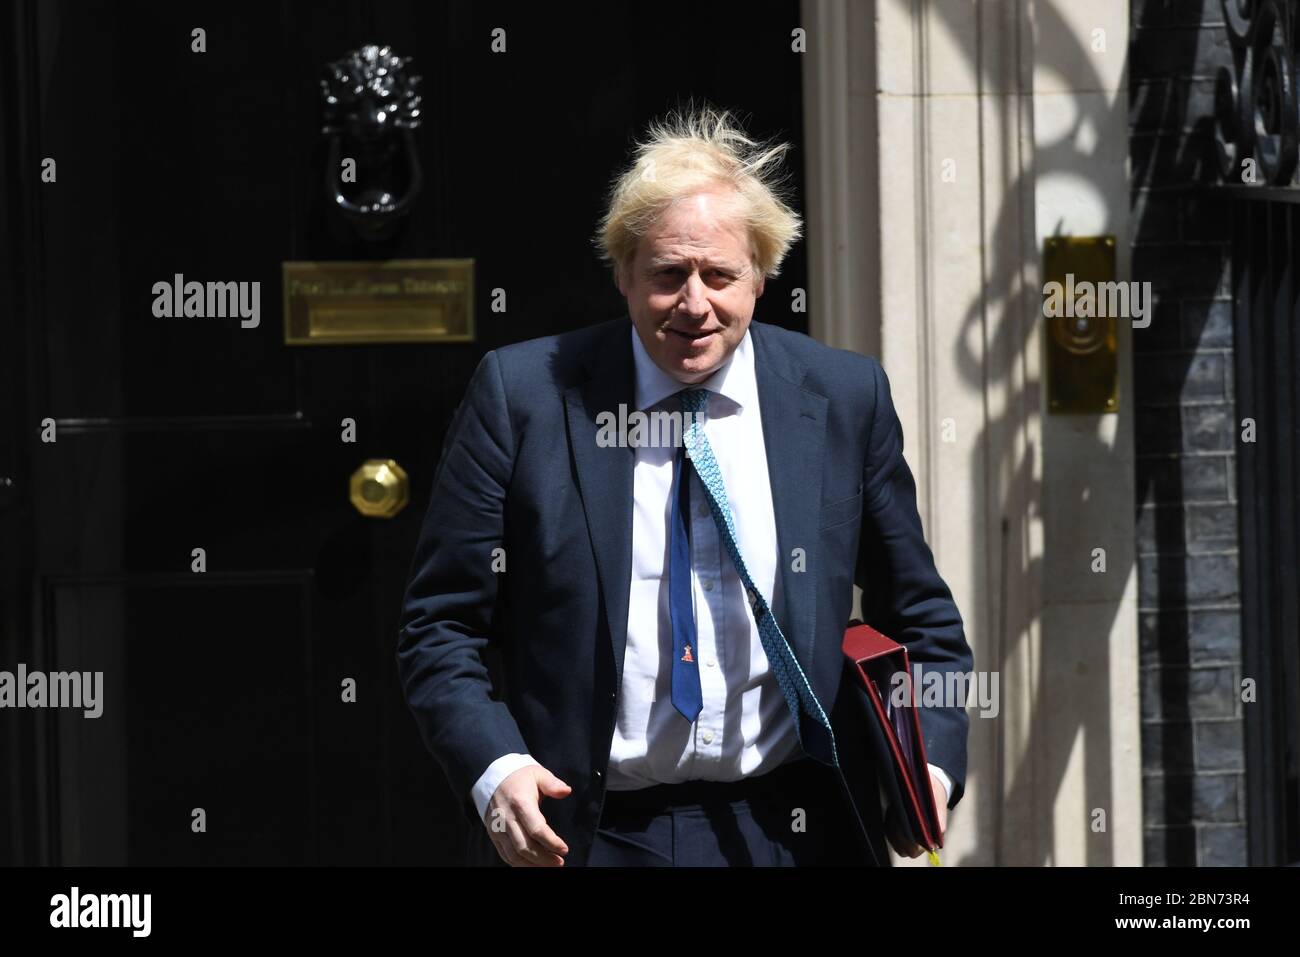 Prime Minister Boris Johnson leaves 10 Downing Street, London, for PMQs in the House of Commons, on the first day of the easing of restrictions to bring the country out of lockdown. Stock Photo